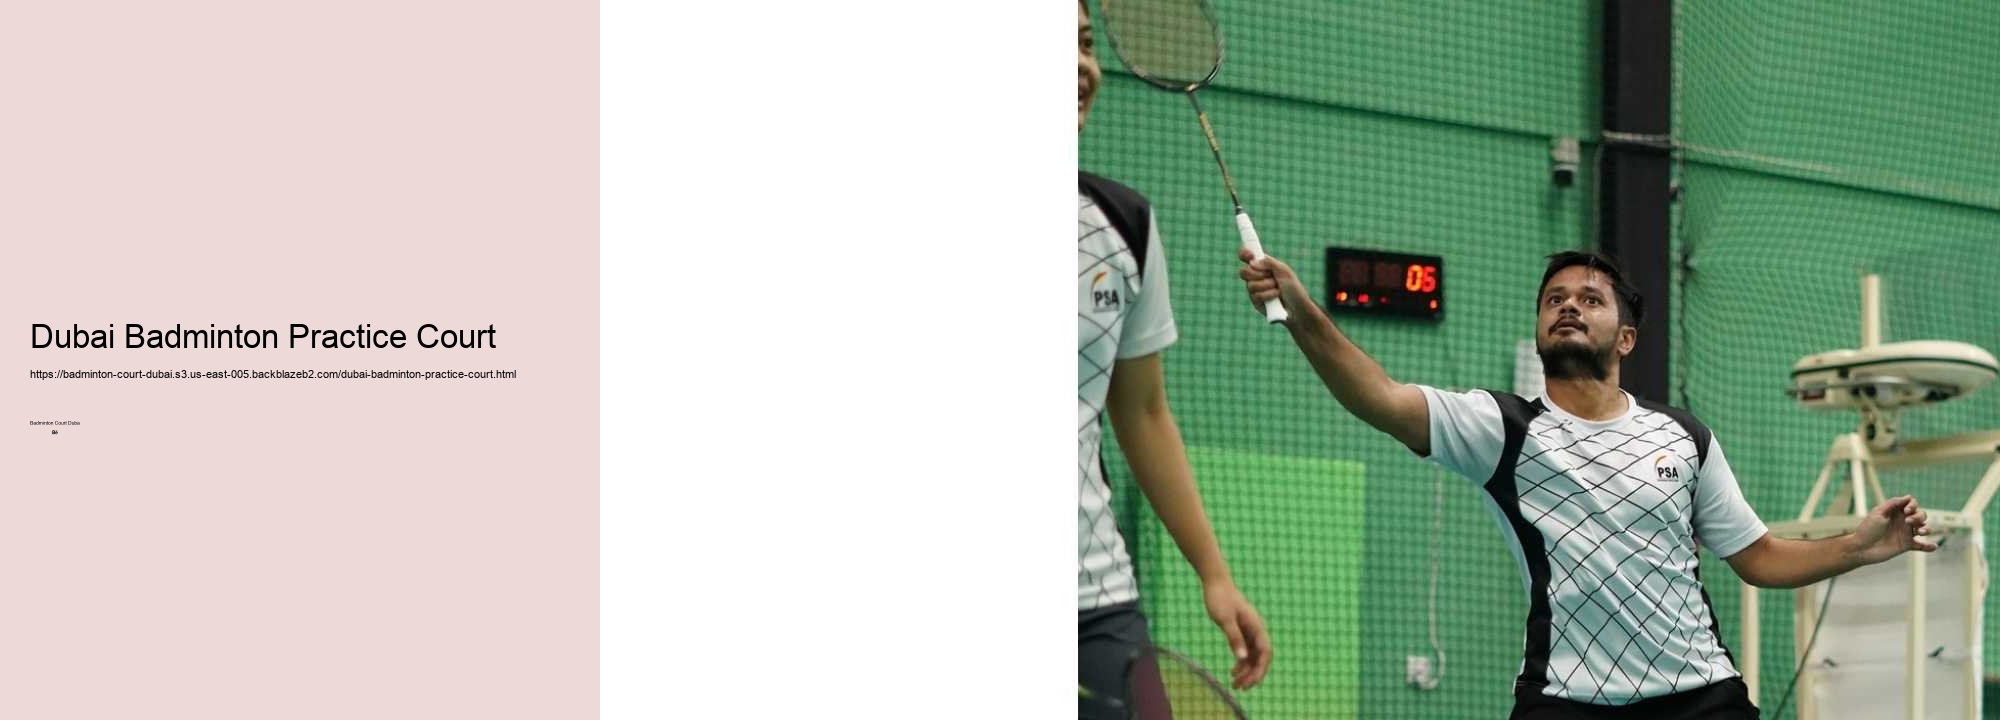 Training for Badminton in Dubai: Clubs, Coaches, and Facilities Review.